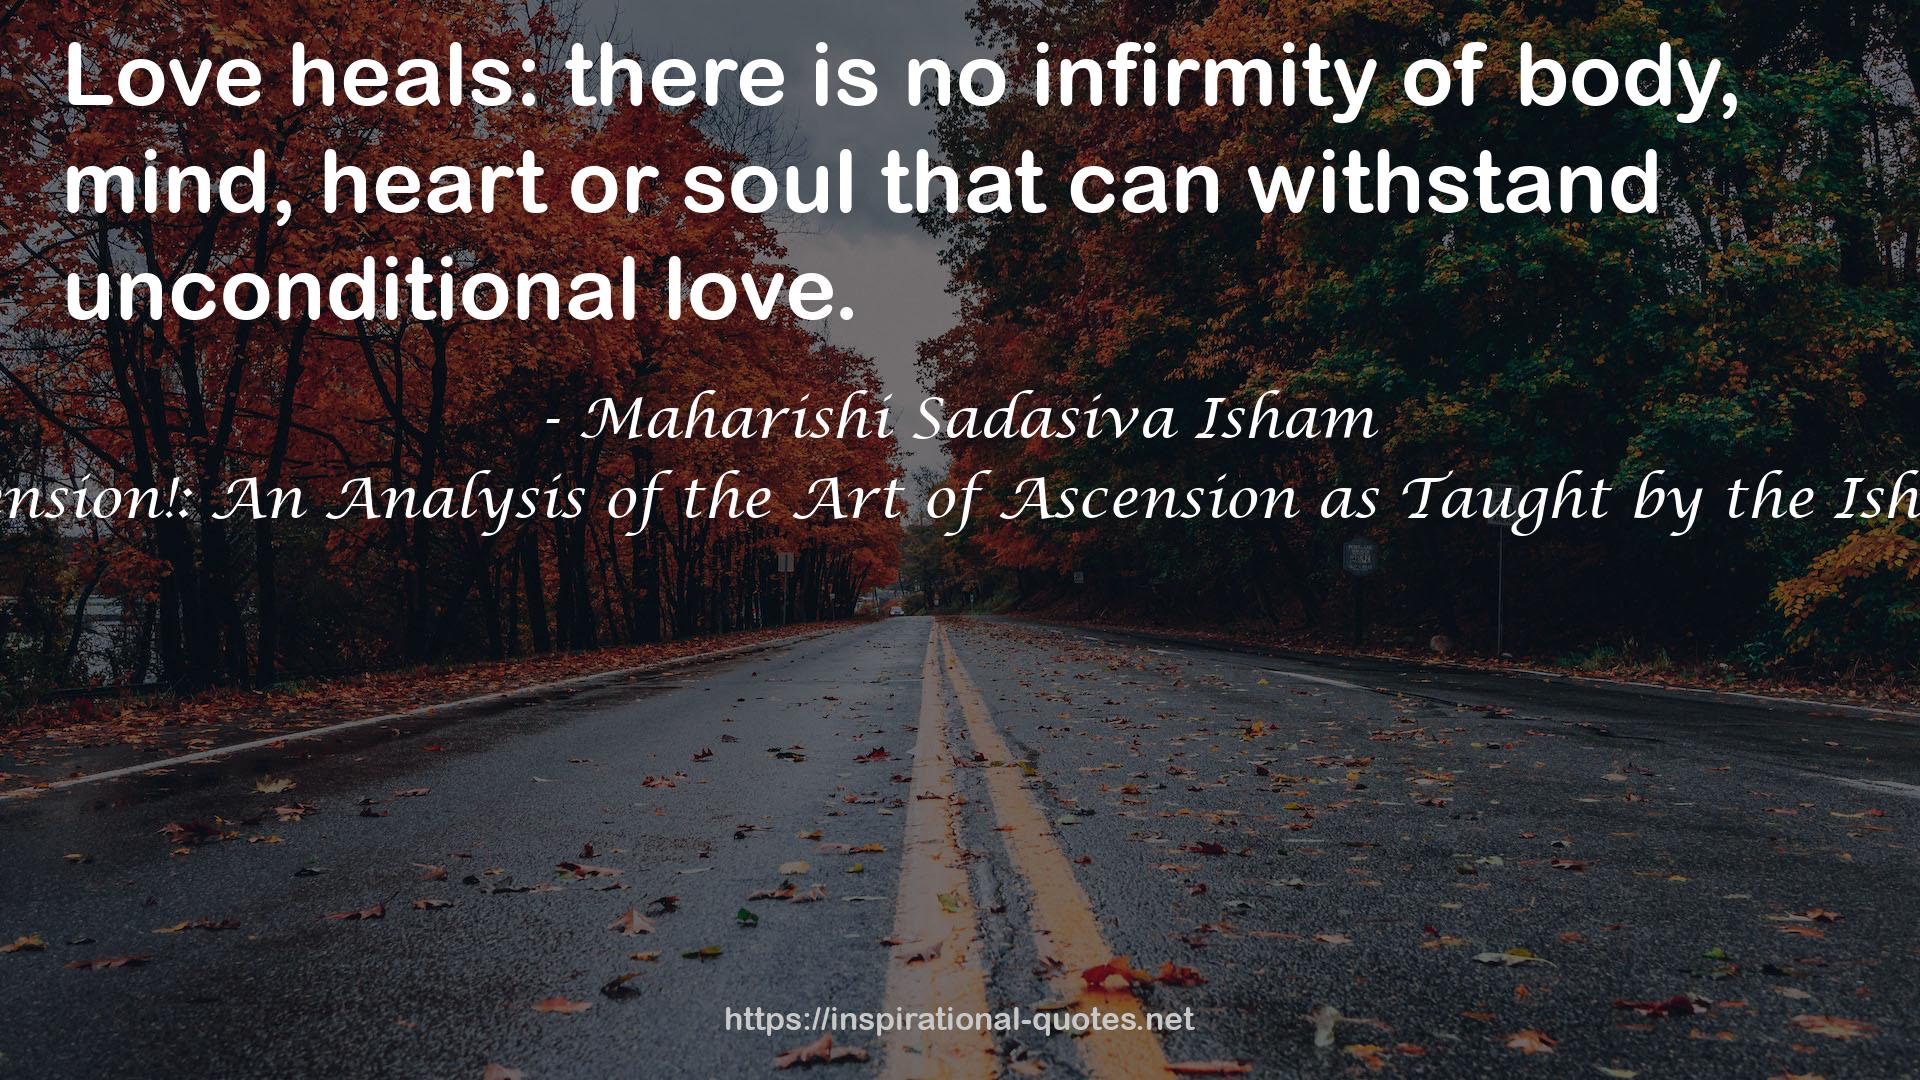 Ascension!: An Analysis of the Art of Ascension as Taught by the Ishayas QUOTES